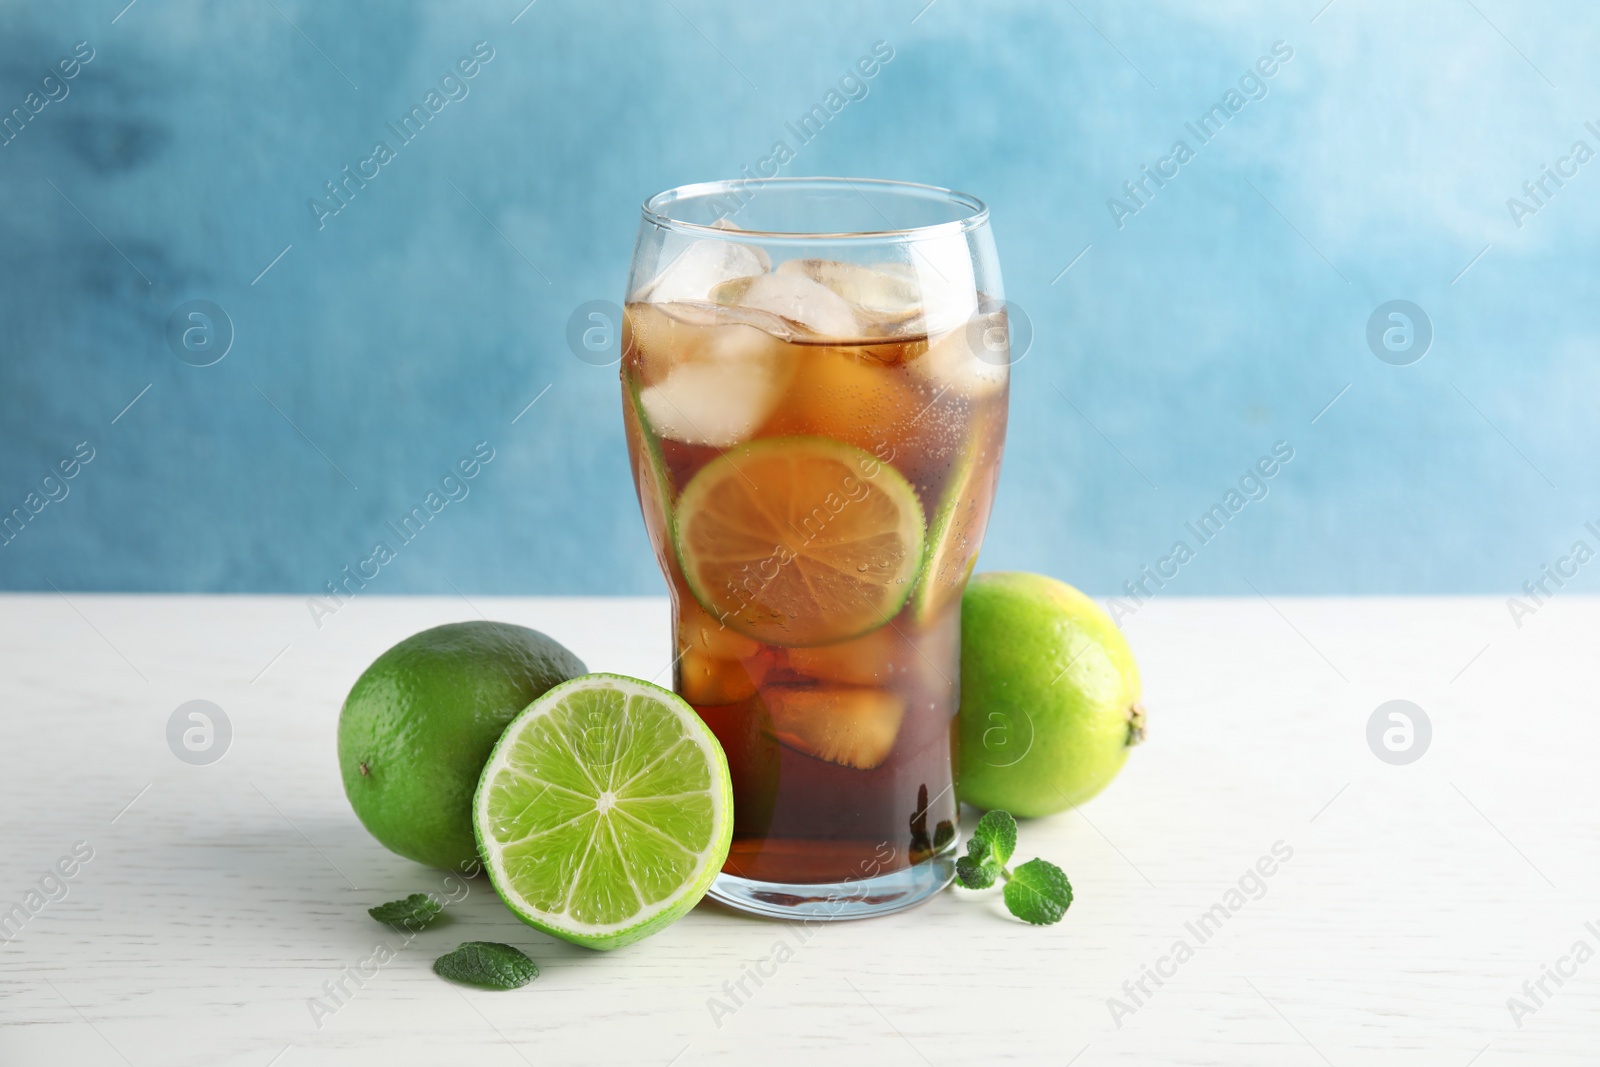 Photo of Glass of coke with ice cubes and limes on table against color background